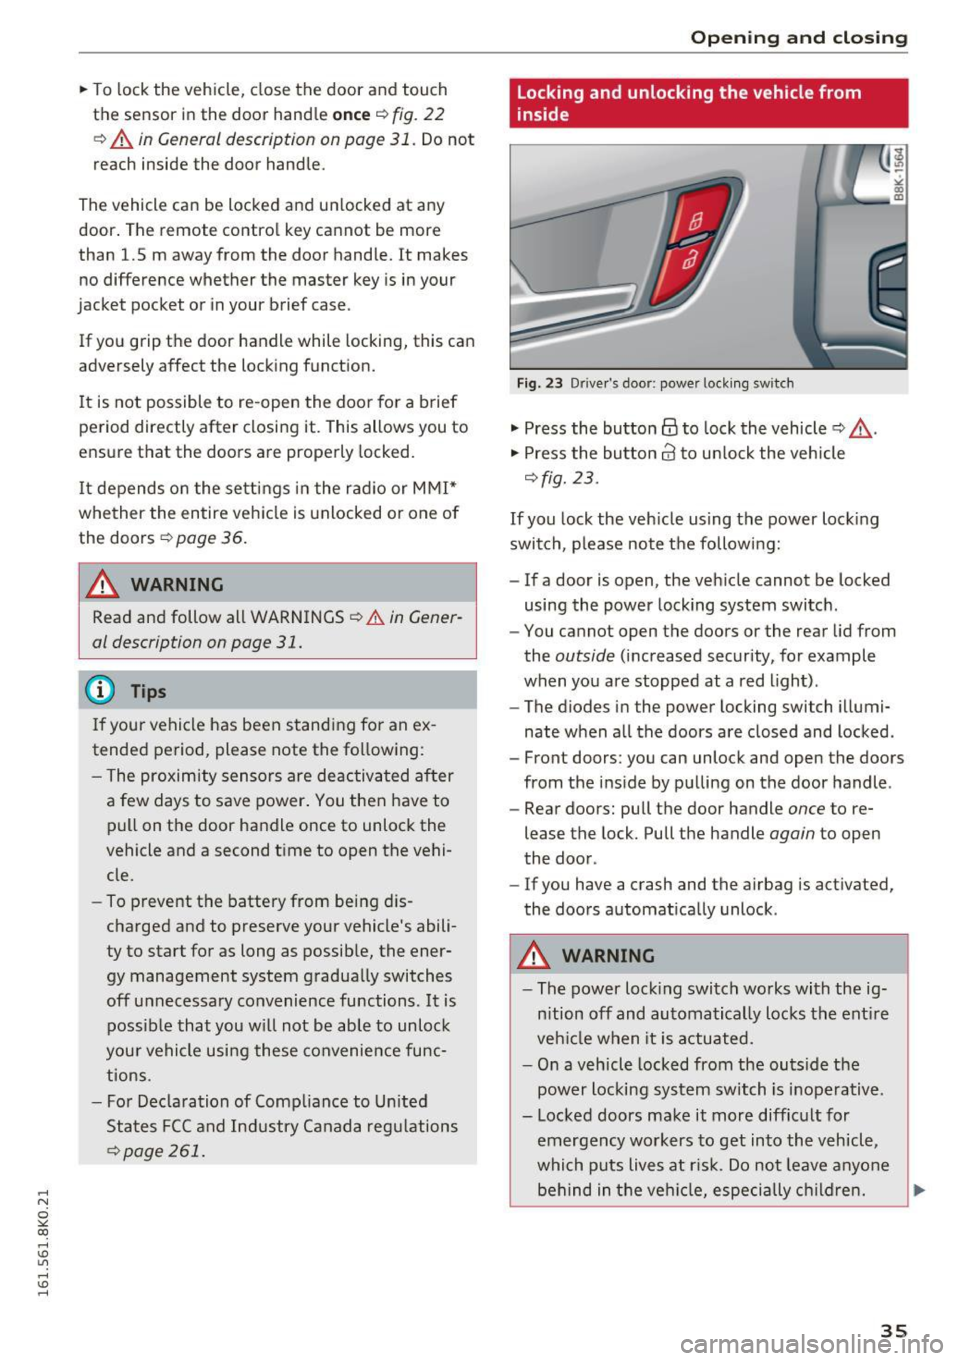 AUDI A4 2016  Owners Manual .... N 
0 
"" CX) 
.... I.Cl U"I 
.... I.Cl .... 
"To lock  the  vehicle,  close  the  door  and  touch 
the  sensor  in the  door  hand le 
once ~ fig. 22 
~ A in  General description  on page  31 